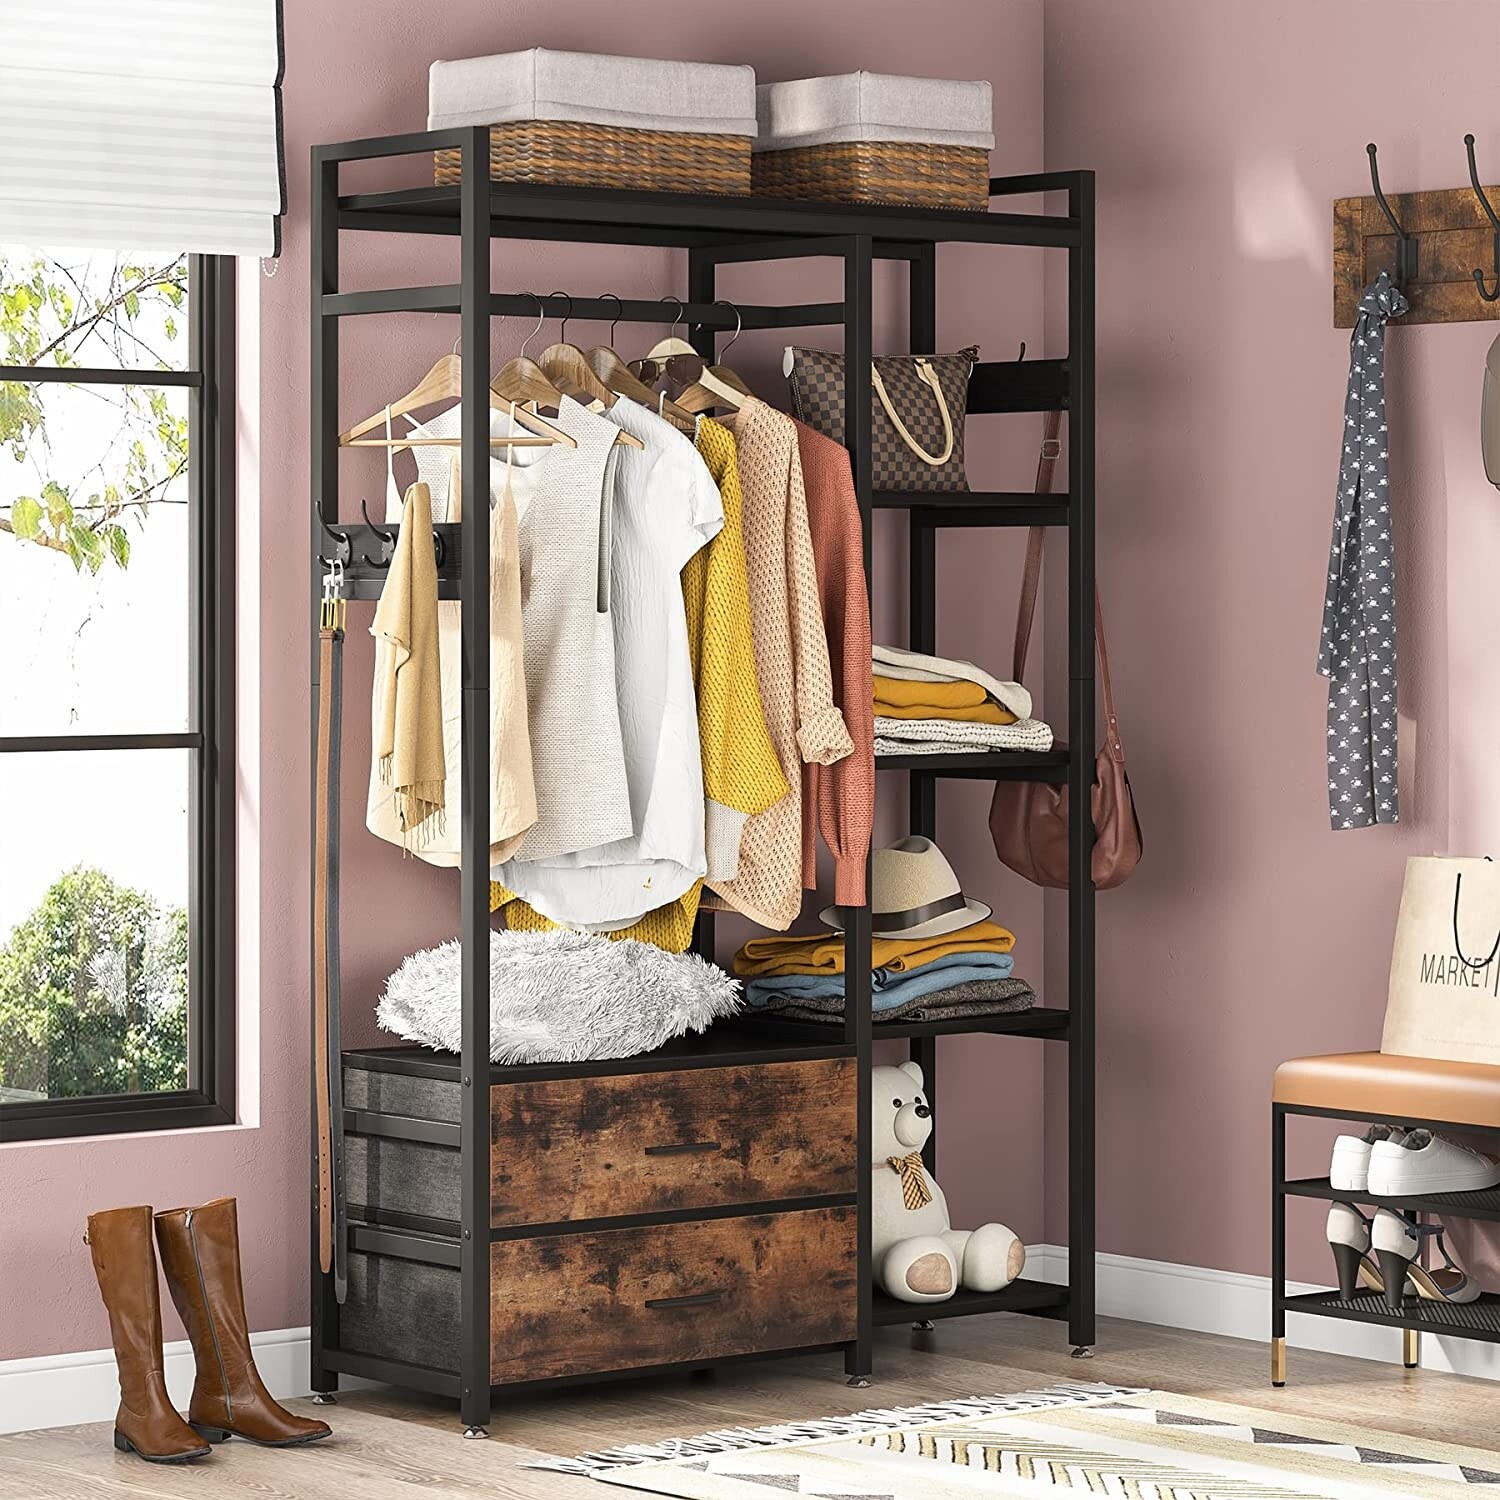 https://ak1.ostkcdn.com/images/products/is/images/direct/1ef7a9cdcd9c68505f66b4331f837f0800b7ce1b/Clothing-Racks-for-Hanging-Clothes%2C-Heavy-Duty-Garment-Rack%2C-Clothes-Organizer.jpg